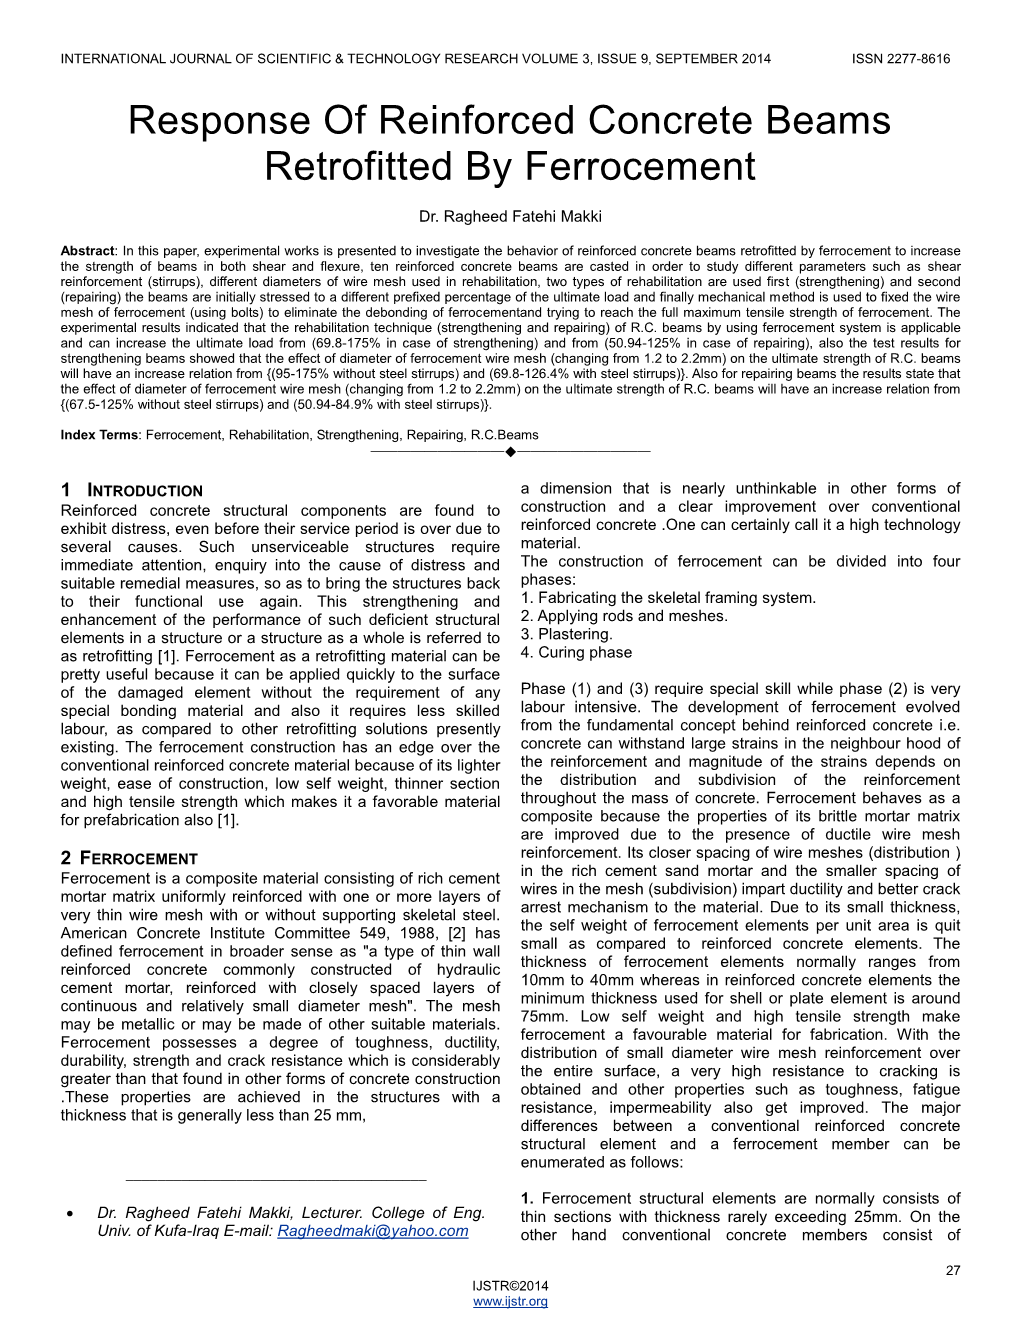 Response of Reinforced Concrete Beams Retrofitted by Ferrocement